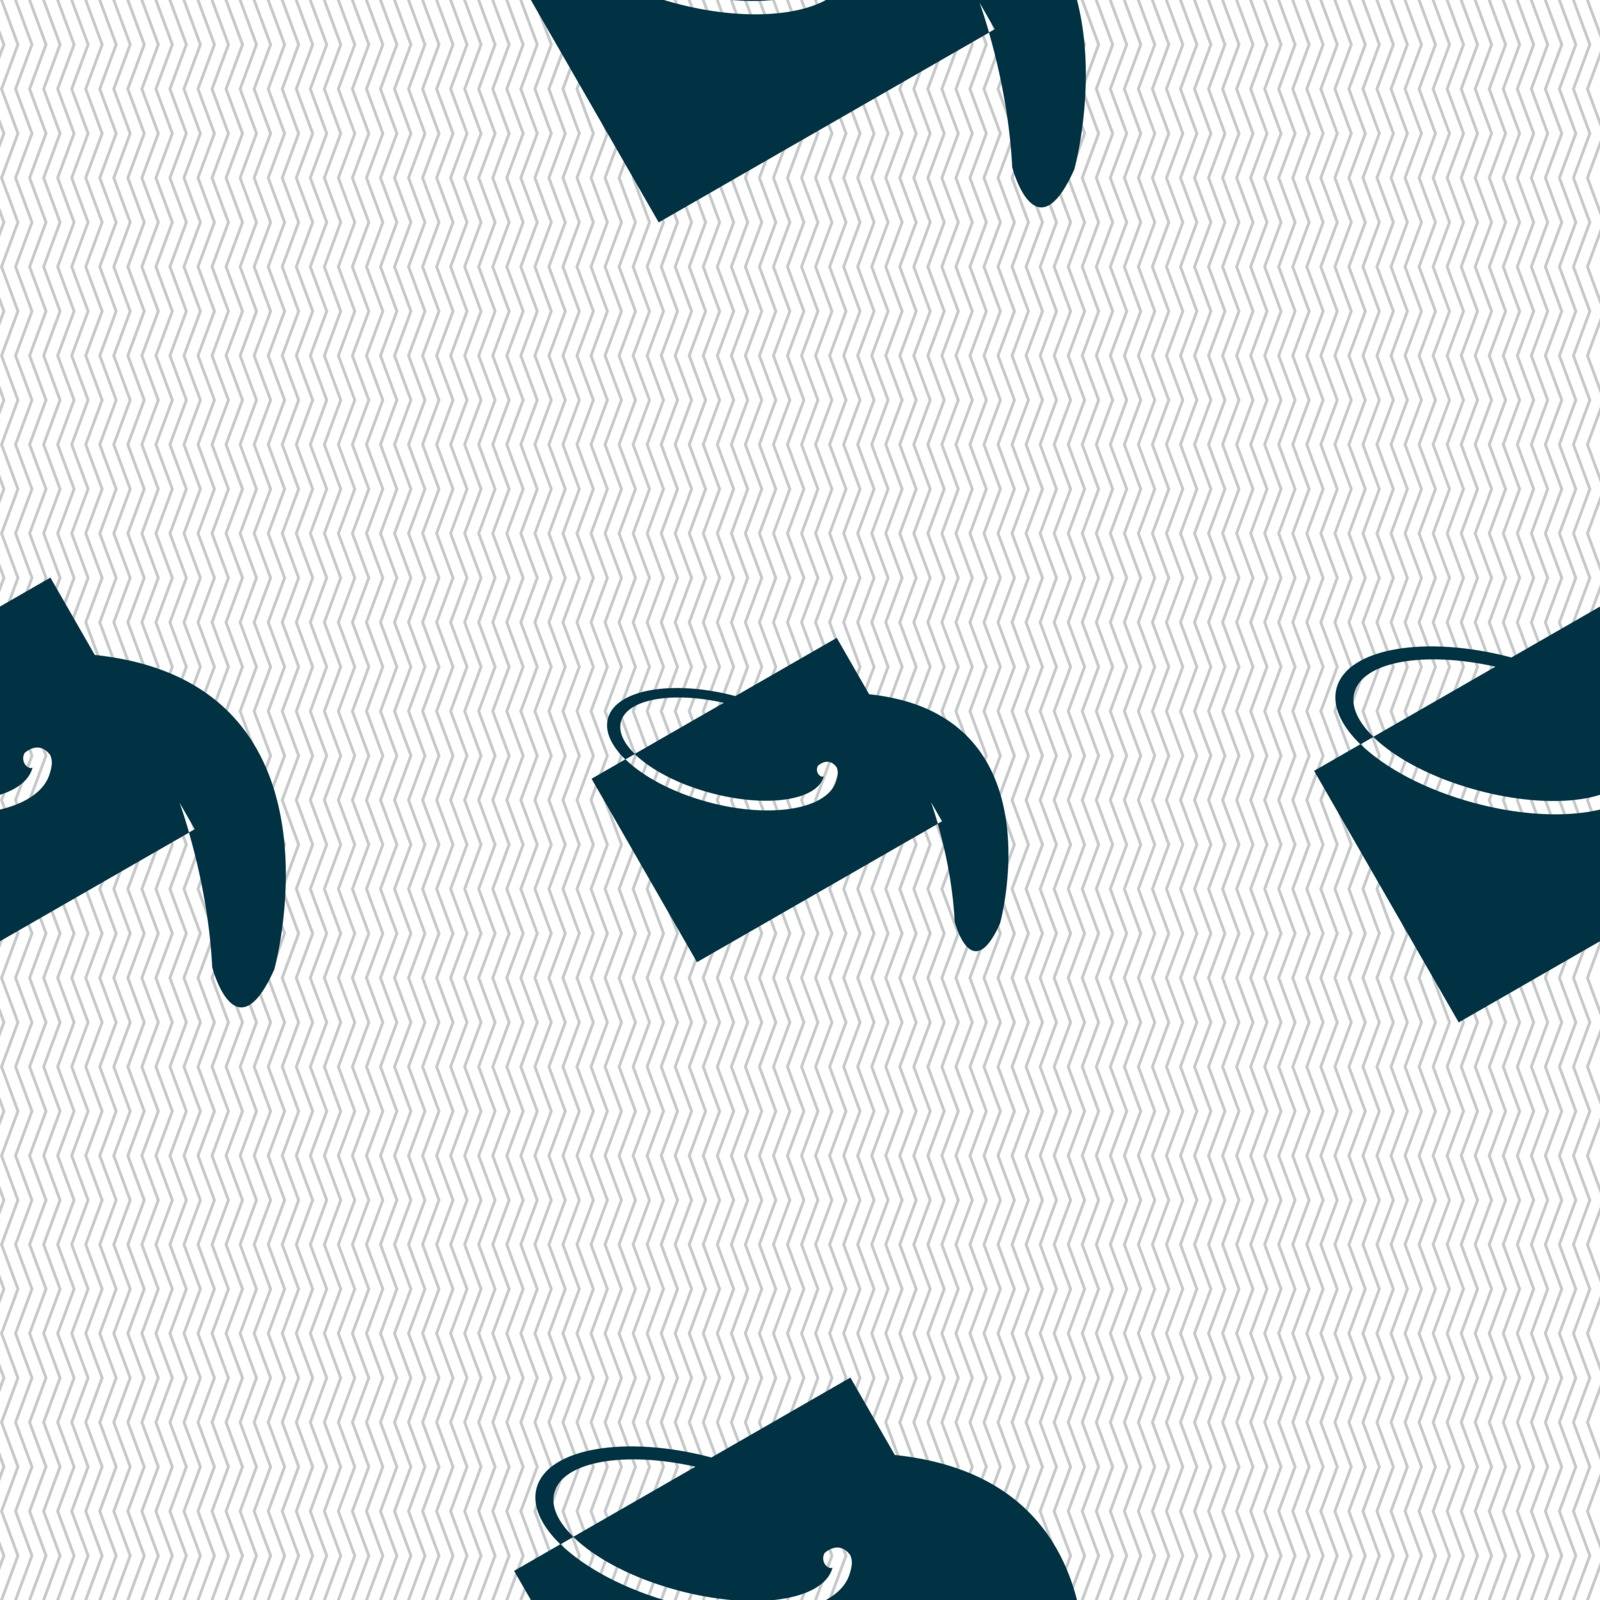 Paint bucket icon sign. Seamless pattern with geometric texture. Vector illustration